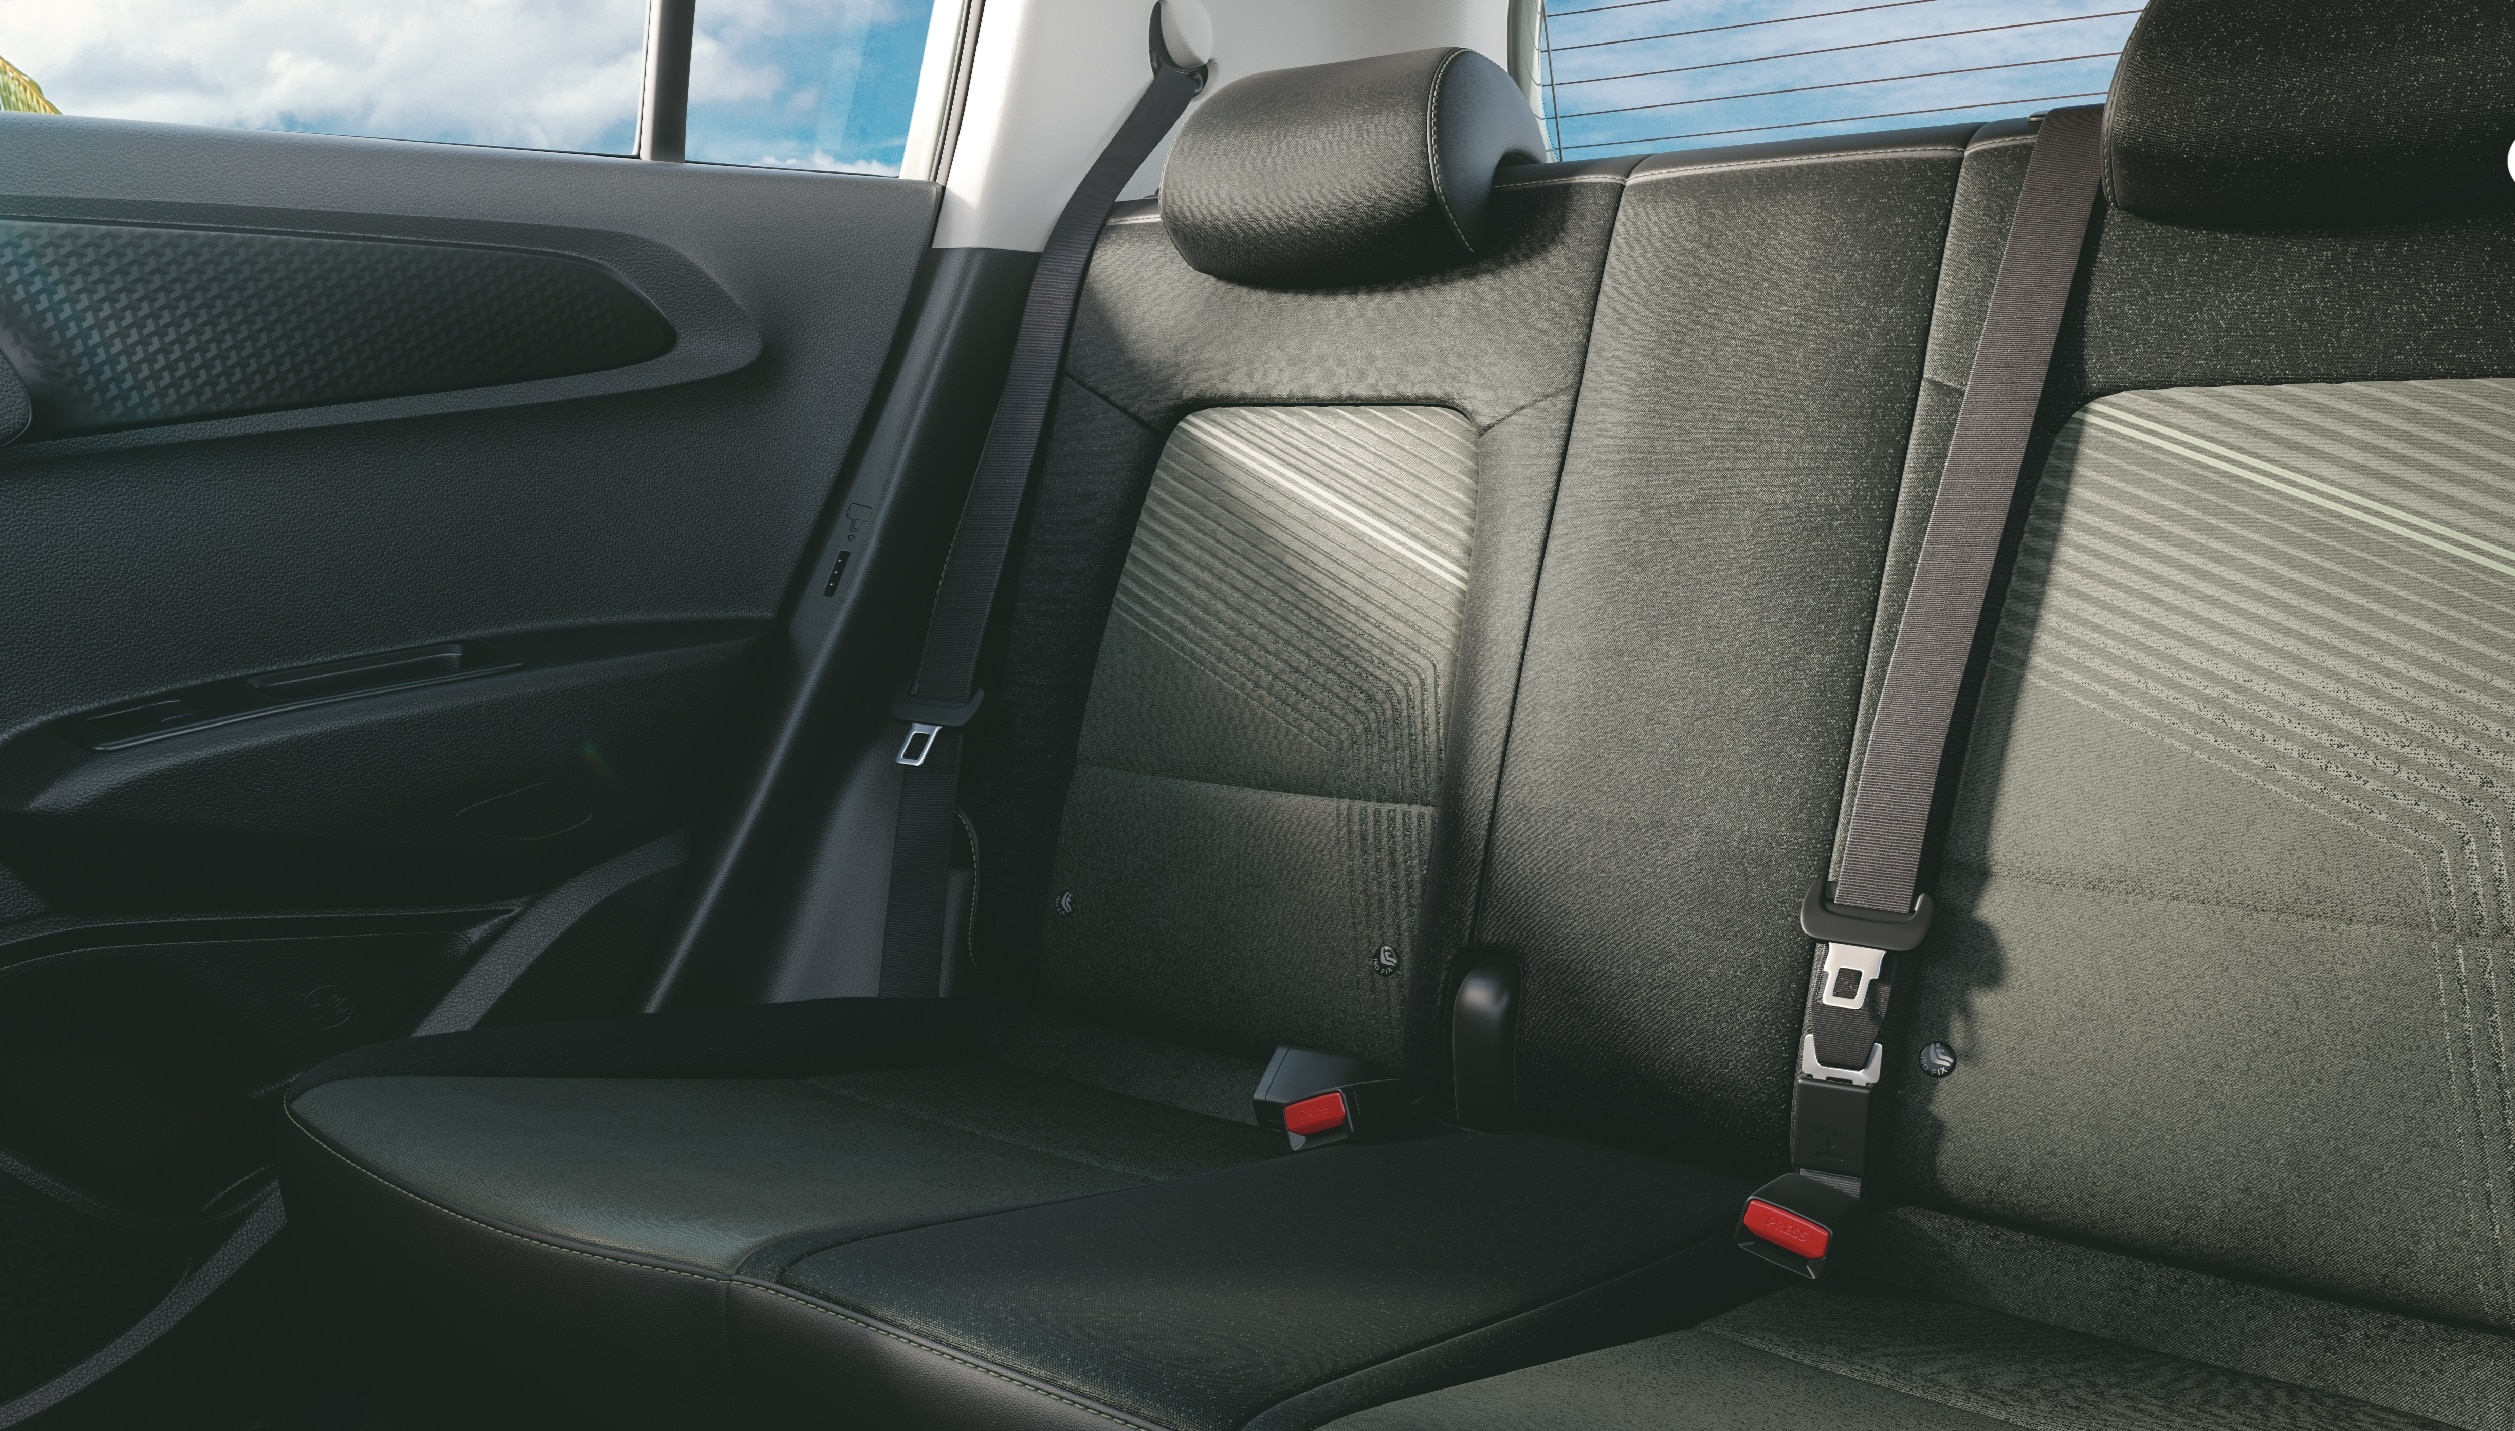 Hyundai Exter Interior Features And Space Revealed